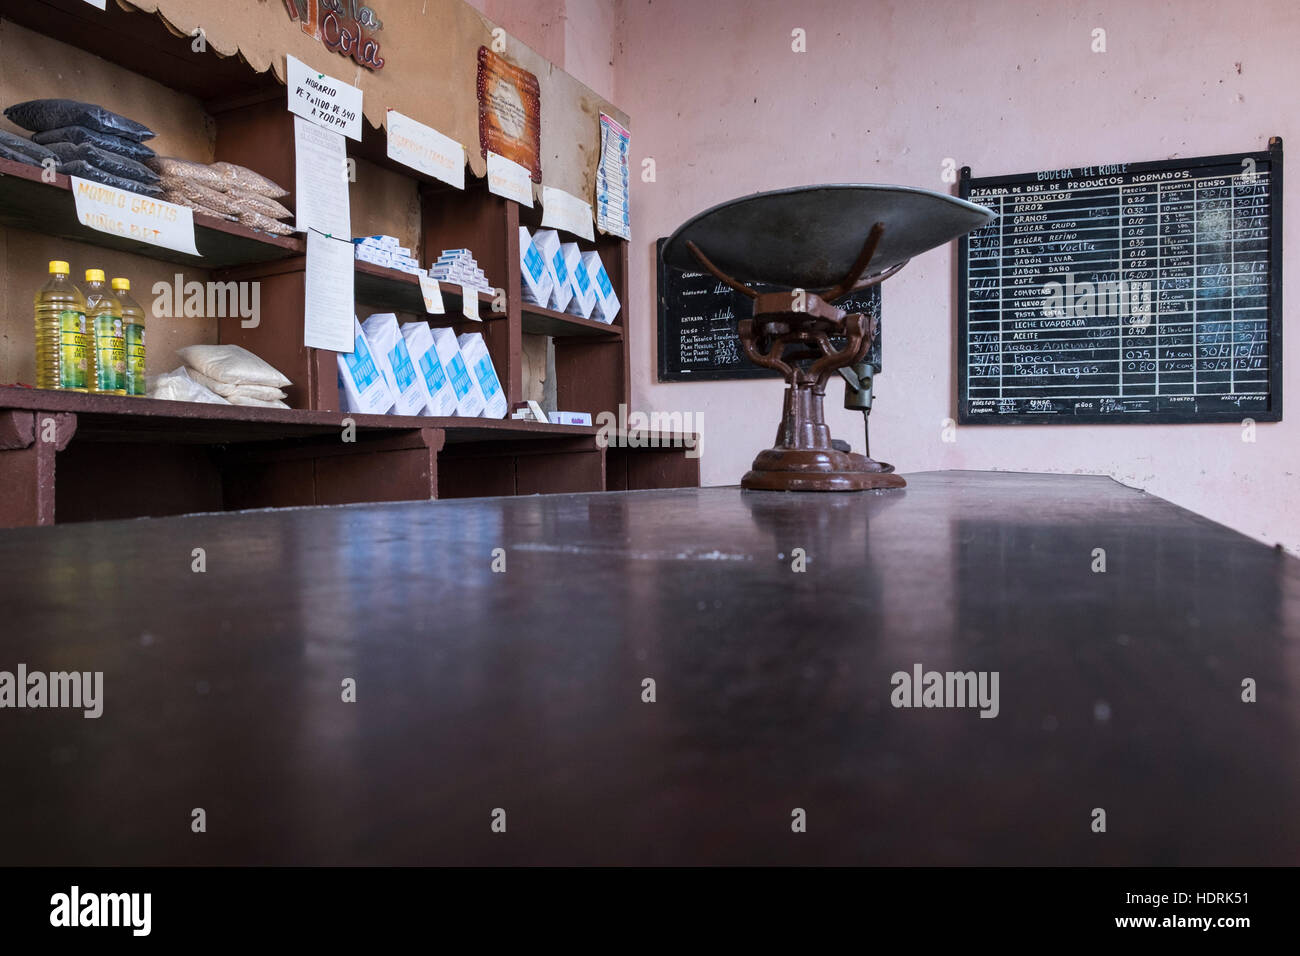 Ration shop in Trinidad, counter, weighing scales and pricelist on blackboard, Cuba Stock Photo